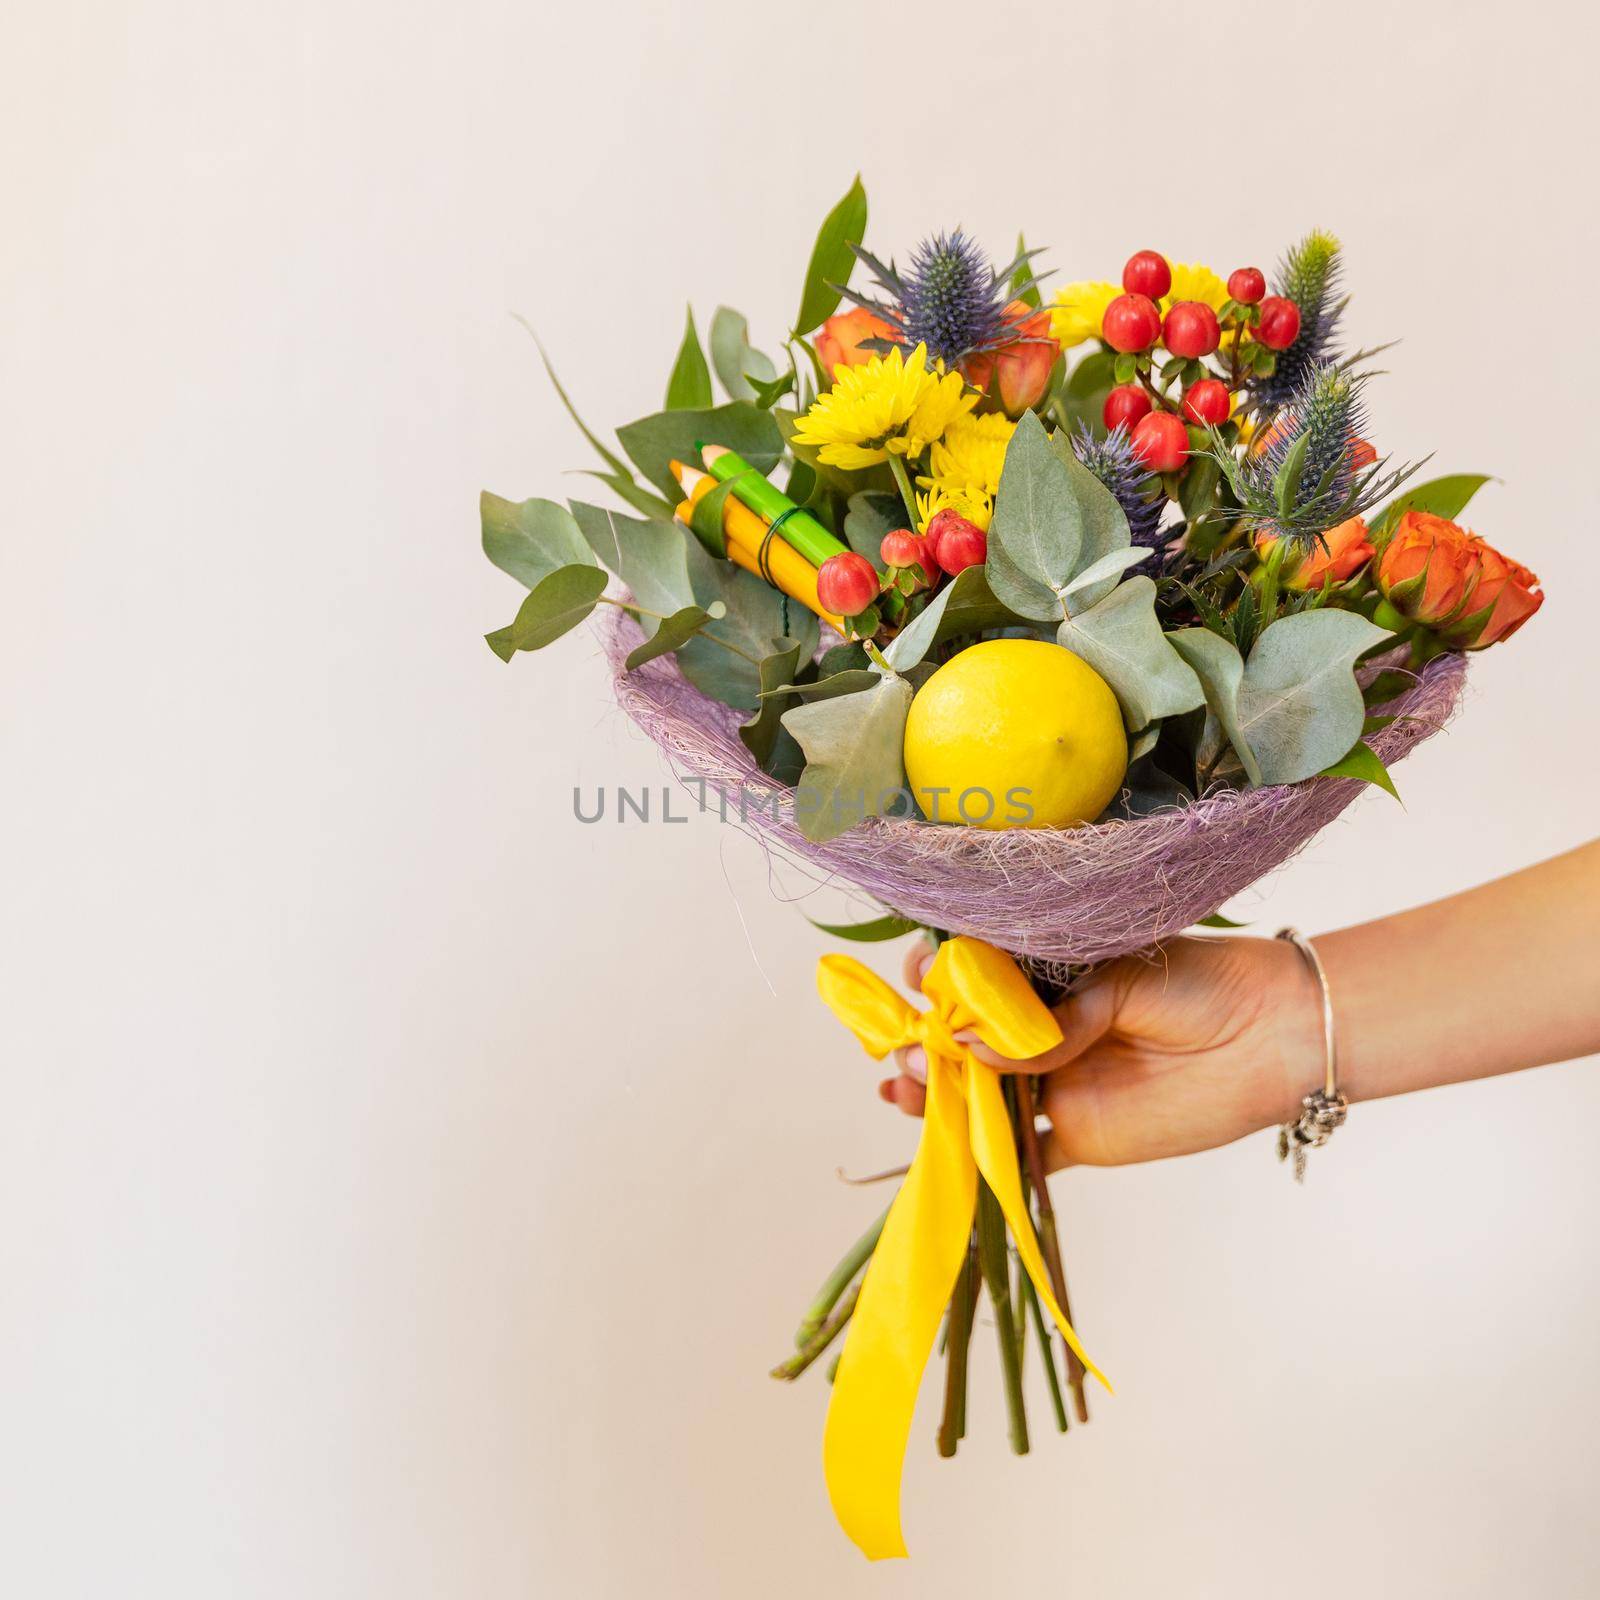 Woman holding colorful flower bouquet with white background by ferhad